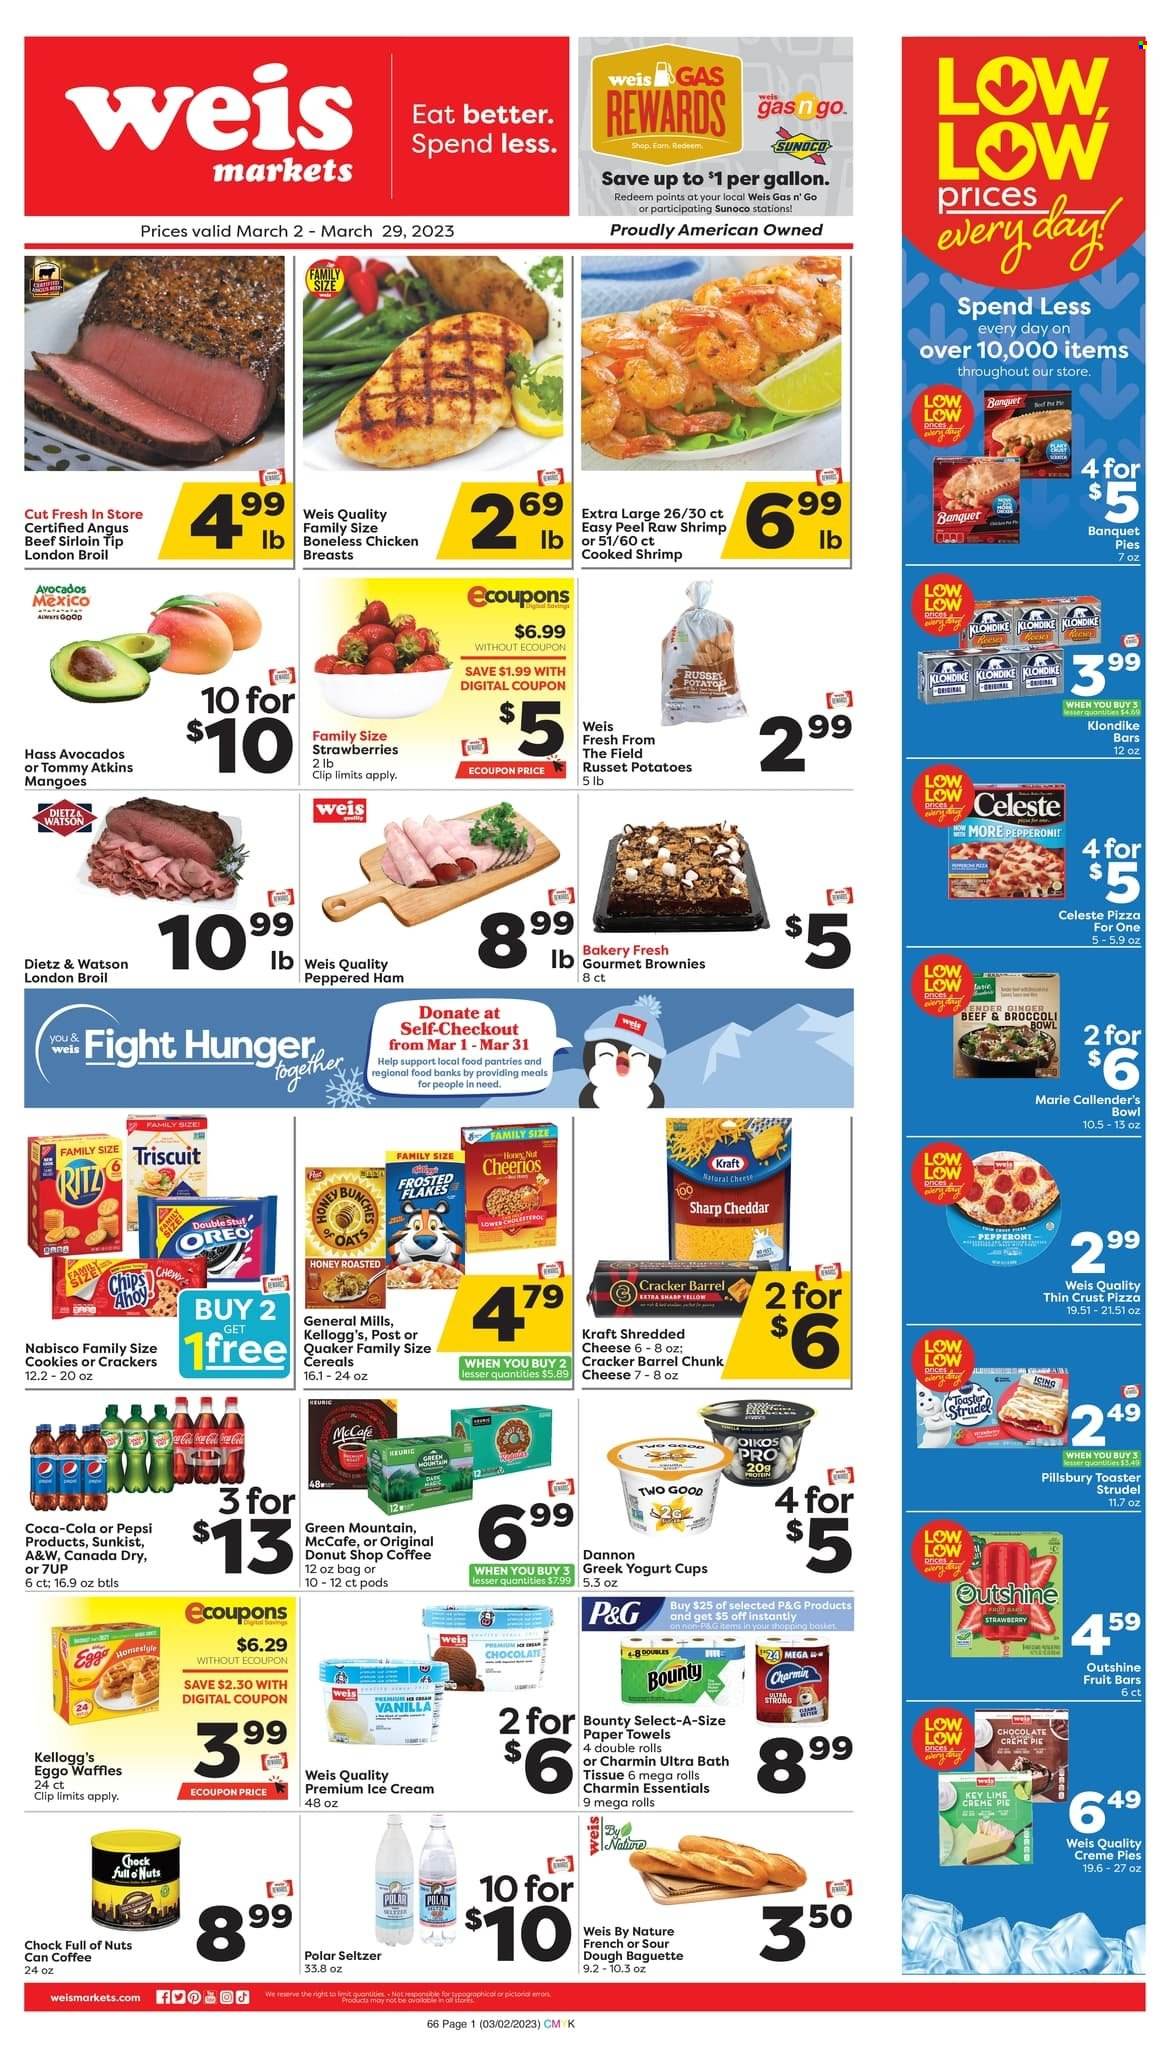 thumbnail - Weis Flyer - 03/02/2023 - 03/29/2023 - Sales products - baguette, pie, strudel, brownies, waffles, broccoli, ginger, russet potatoes, potatoes, avocado, beef meat, beef sirloin, shrimps, pizza, Pillsbury, Quaker, Marie Callender's, Kraft®, ham, Dietz & Watson, pepperoni, shredded cheese, cheddar, cheese, chunk cheese, greek yoghurt, Oreo, yoghurt, Oikos, Dannon, ice cream, Reese's, Celeste, cookies, Bounty, crackers, Kellogg's, RITZ, Cheerios, Frosted Flakes, Canada Dry, Coca-Cola, Pepsi, 7UP, A&W, coffee, McCafe, Green Mountain, red wine, wine, bath tissue, kitchen towels, paper towels, Charmin, bowl. Page 1.